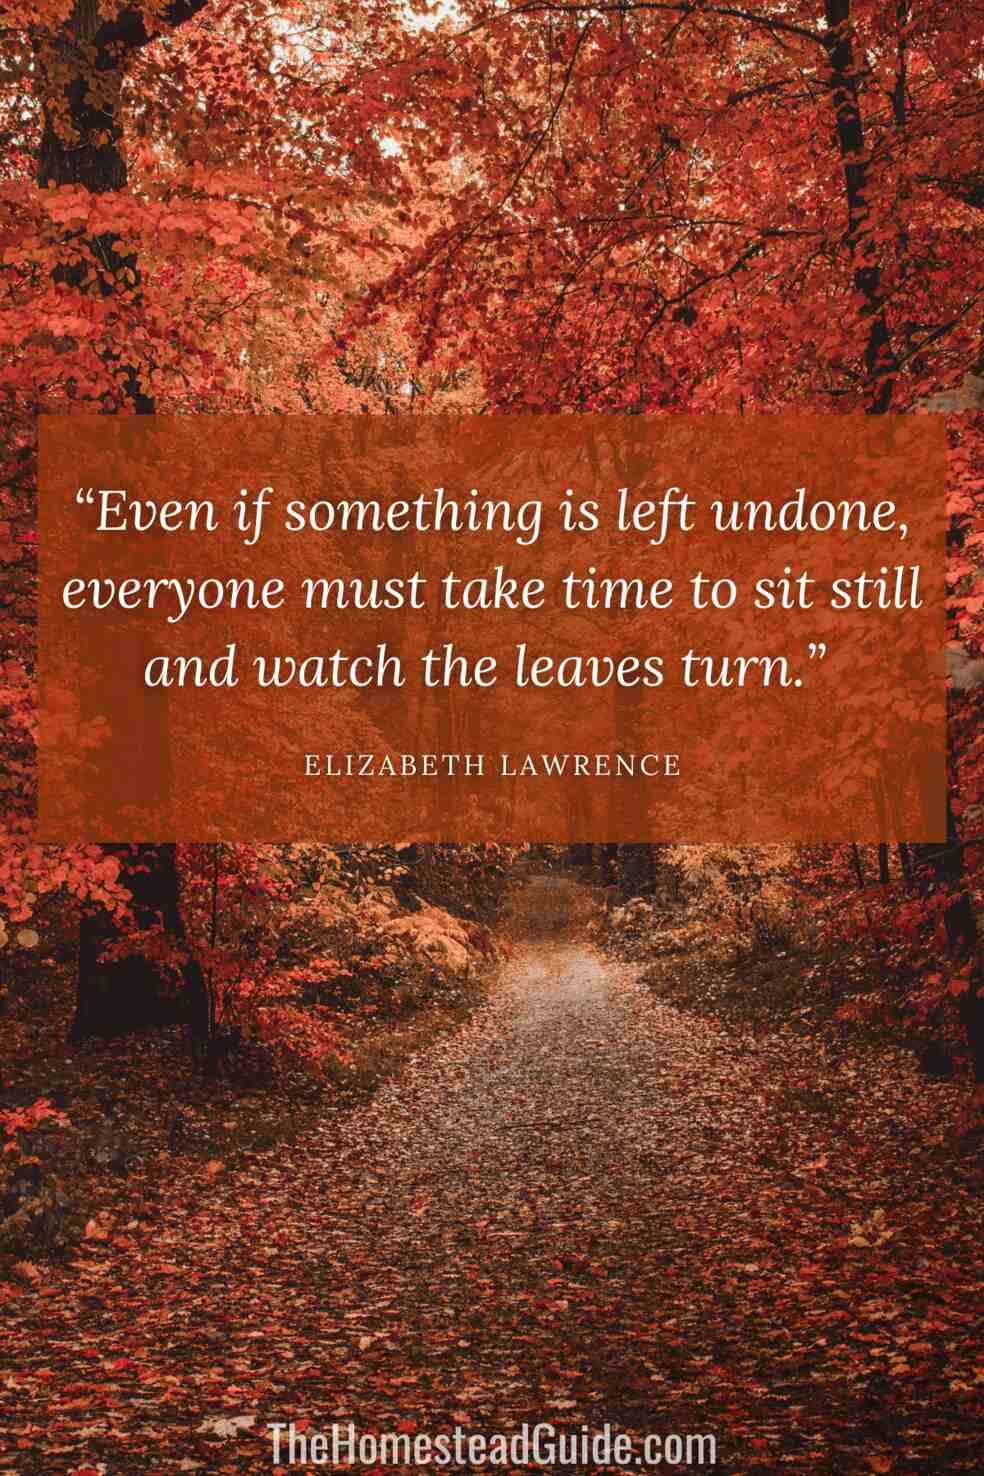 Even if something is left undone, everyone must take time to sit still and watch the leaves turn.